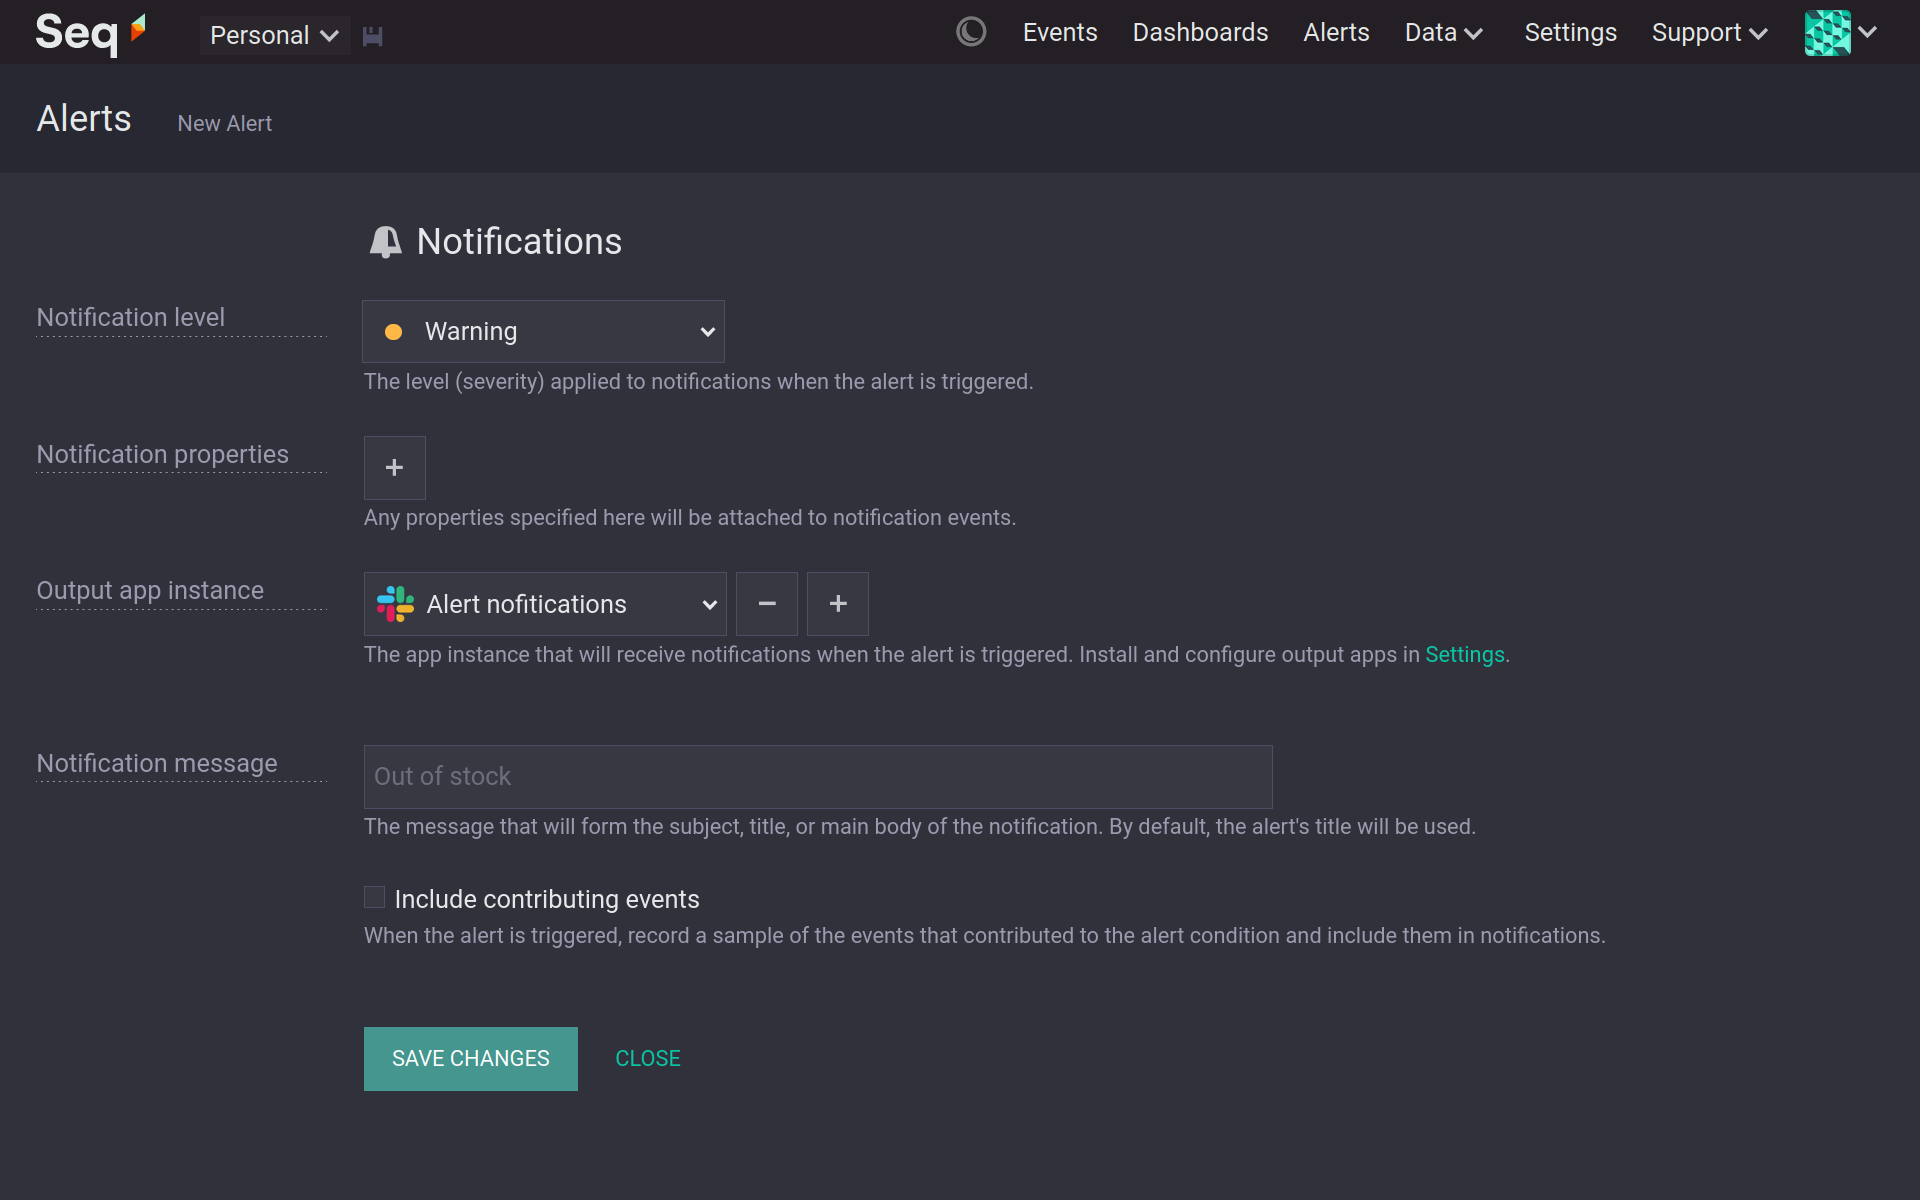 Seq Alerts edit screen scrolled to Notifications section showing warning notification level selected, and Slack "Alert notifications" output selected.